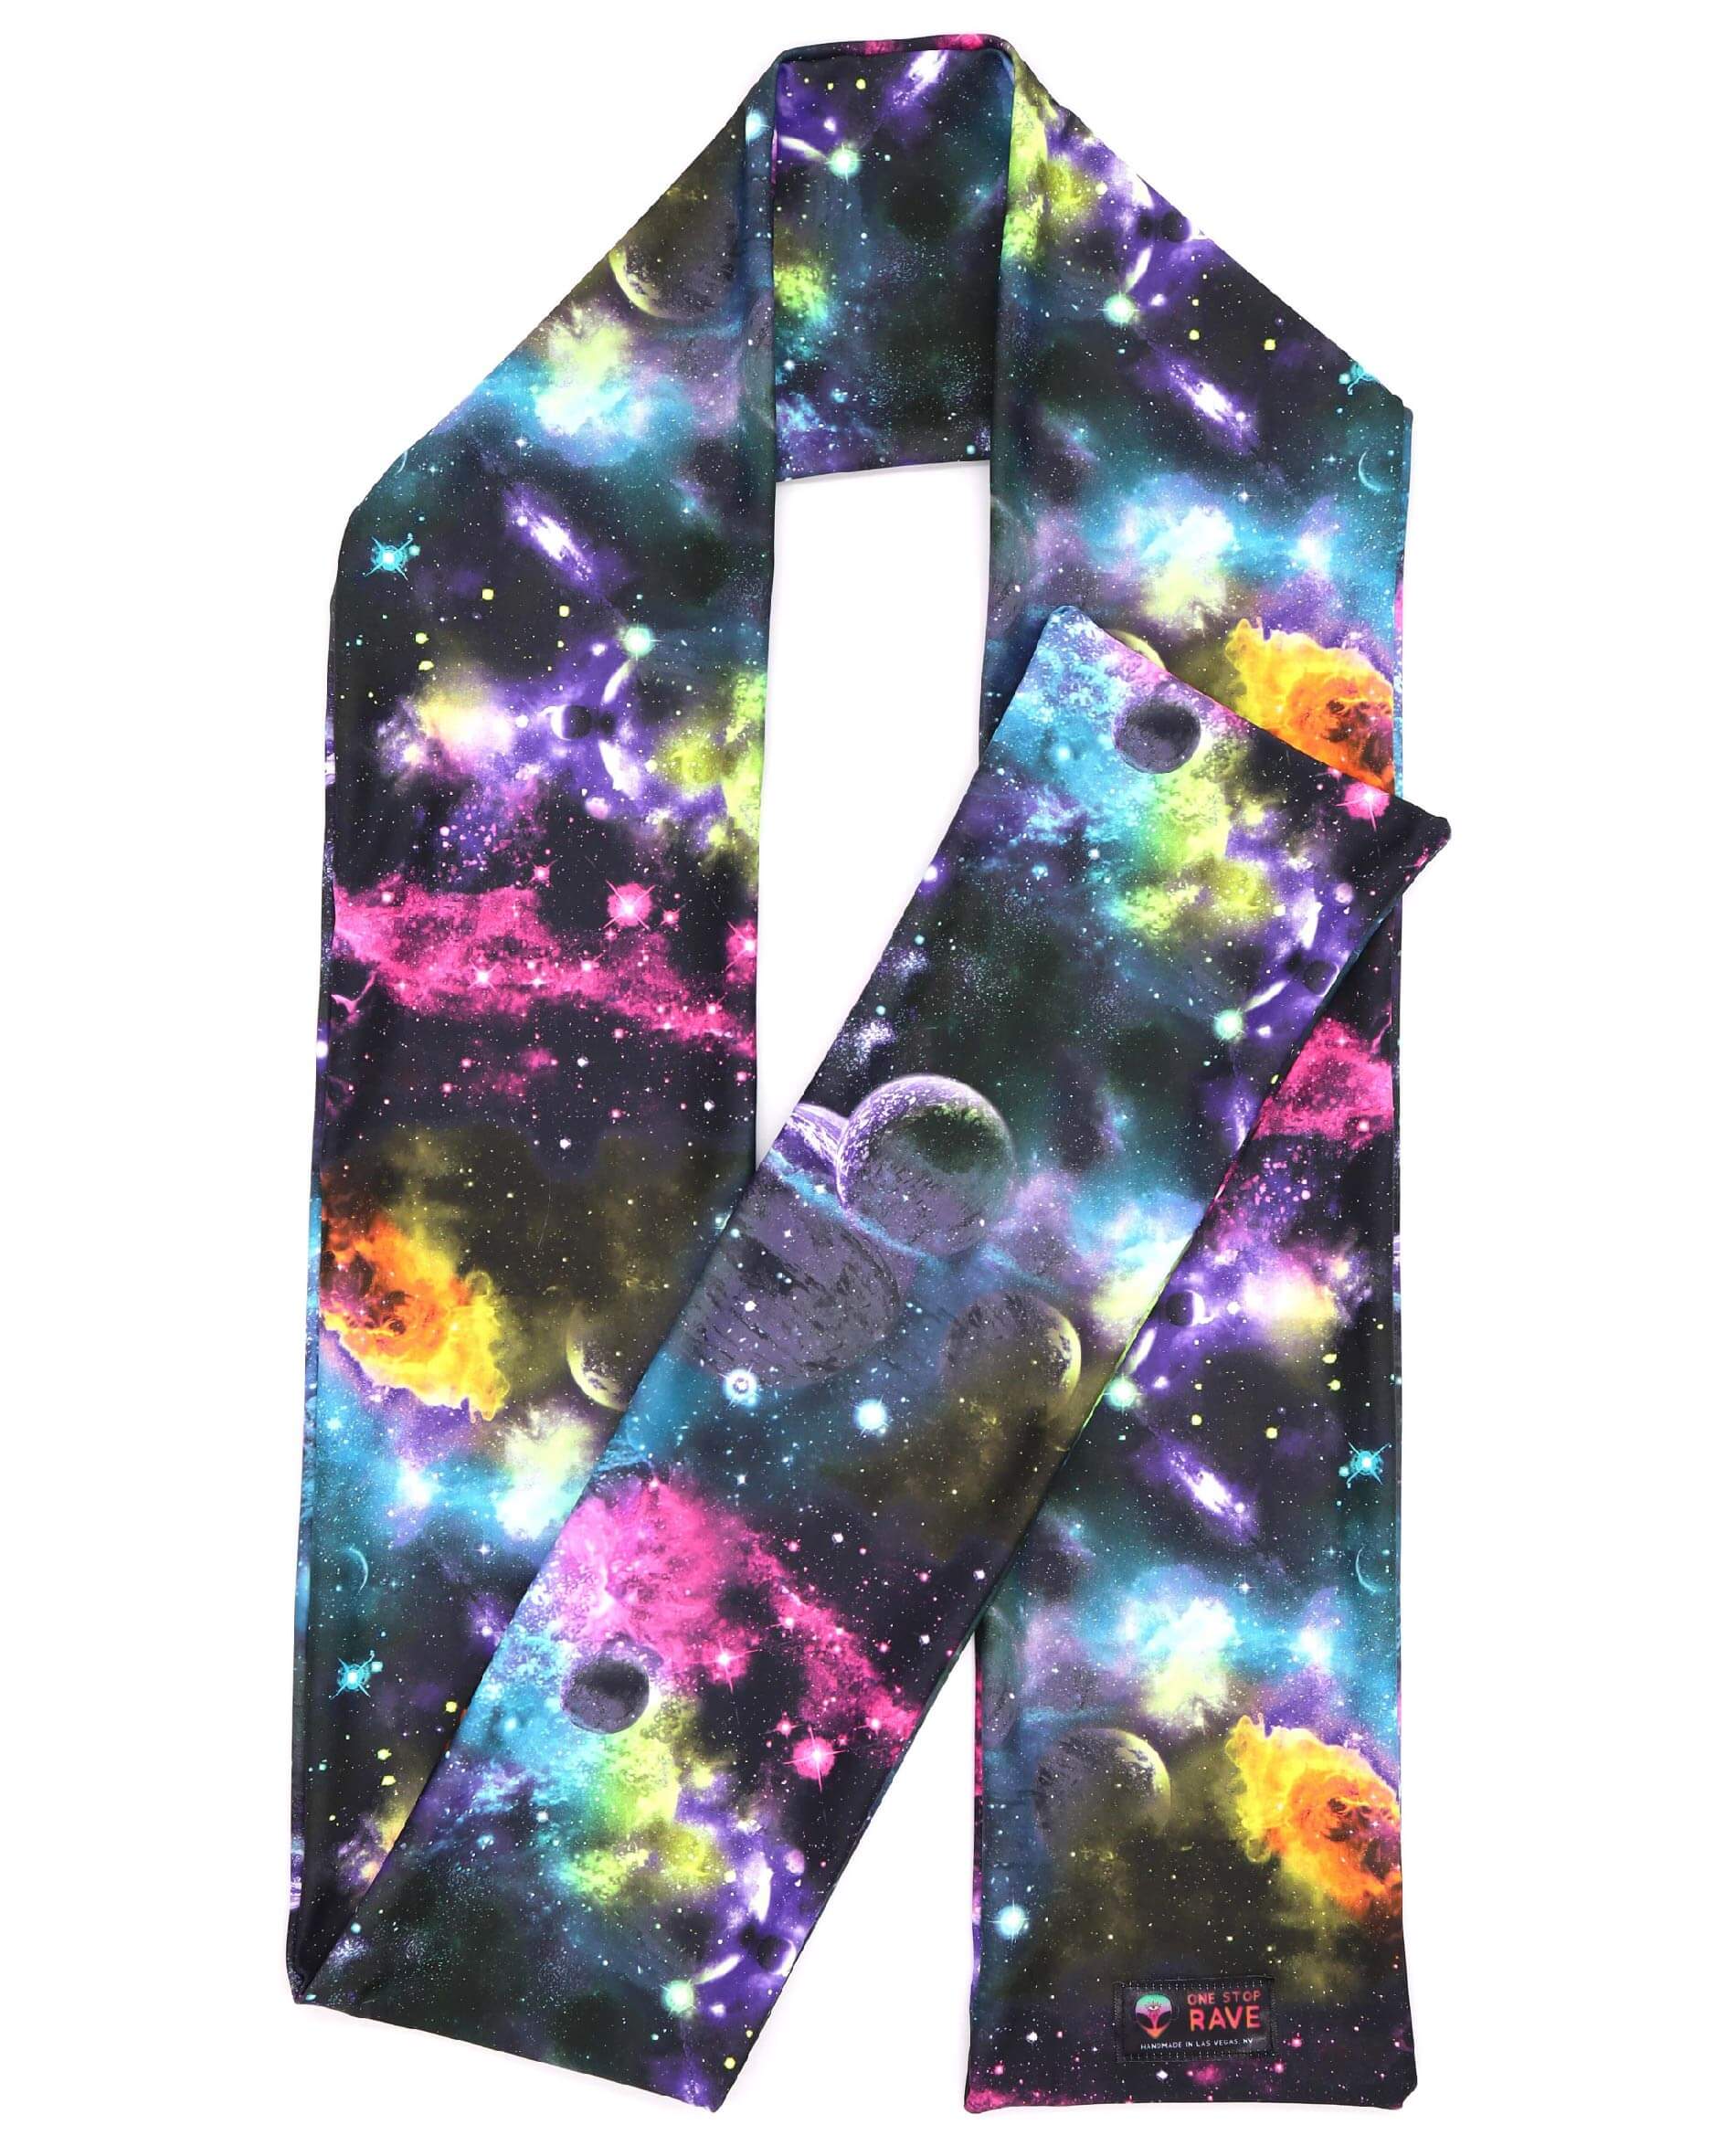 Space Dust Rave Scarf showing off the galaxy print